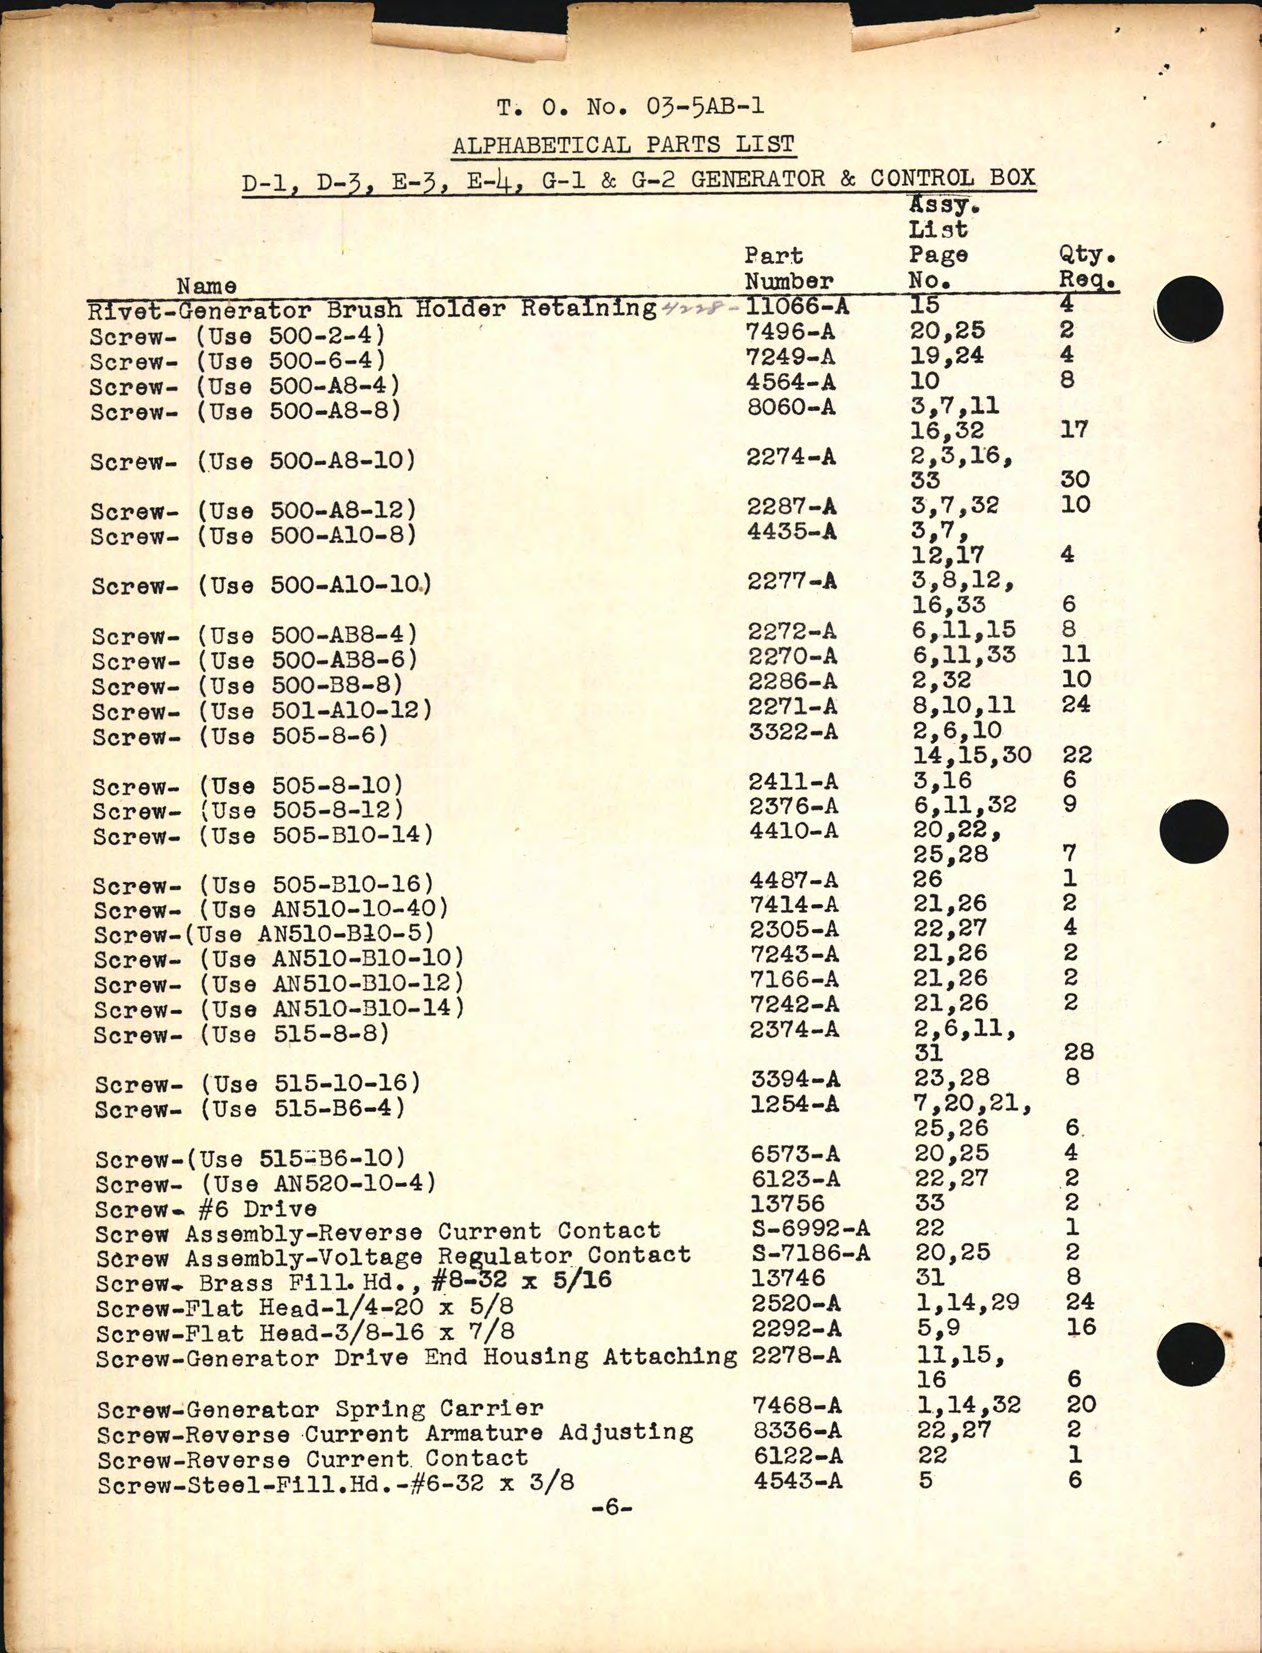 Sample page 6 from AirCorps Library document: Alphabetical Parts List for D-1, D-3, E-3, G-1, and G-2 Generators and Control Box